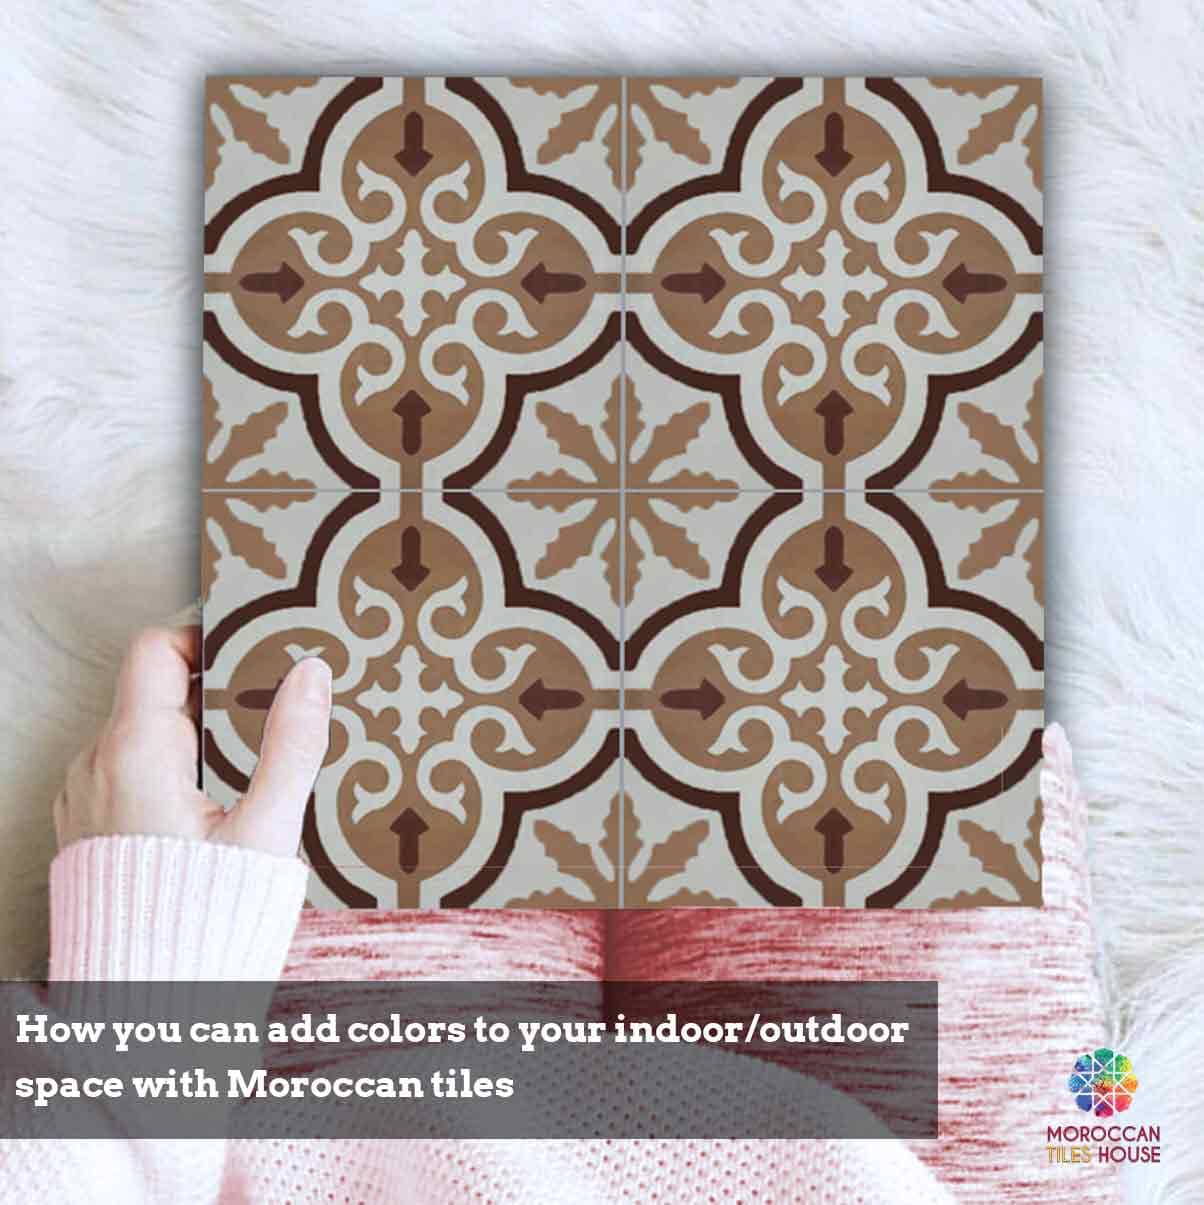 How you can add colors to your indoor/outdoor space with Moroccan tiles post title image